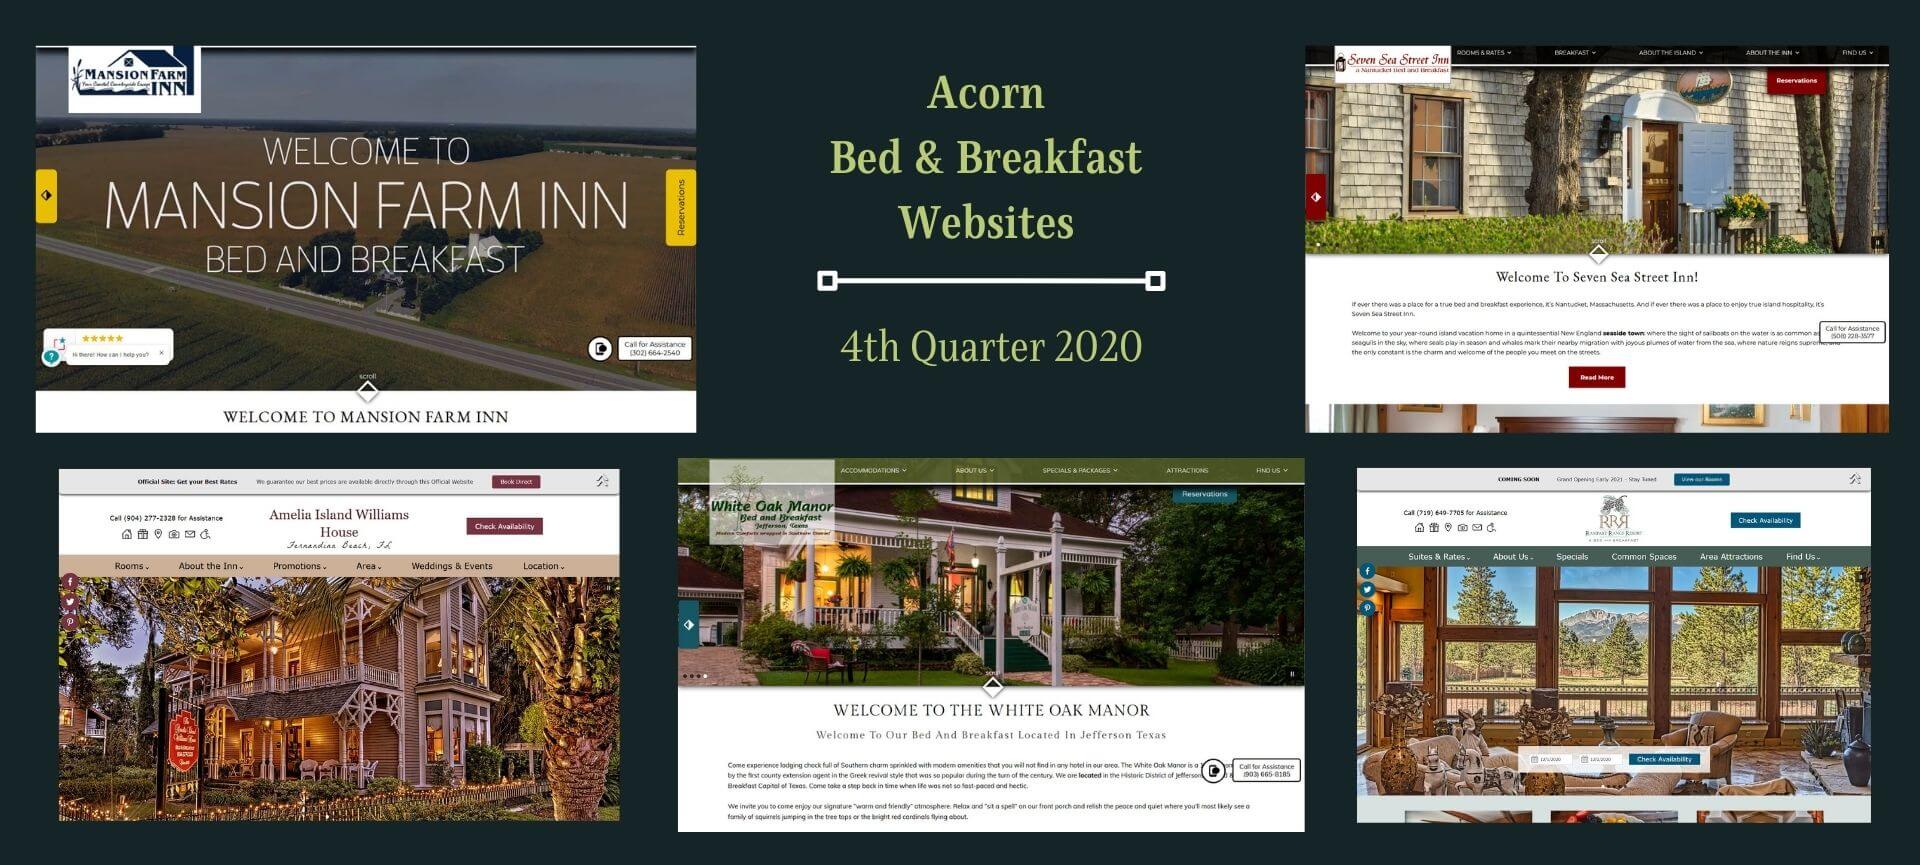 Latest B&B Websites from Acorn with collage of website screenshots